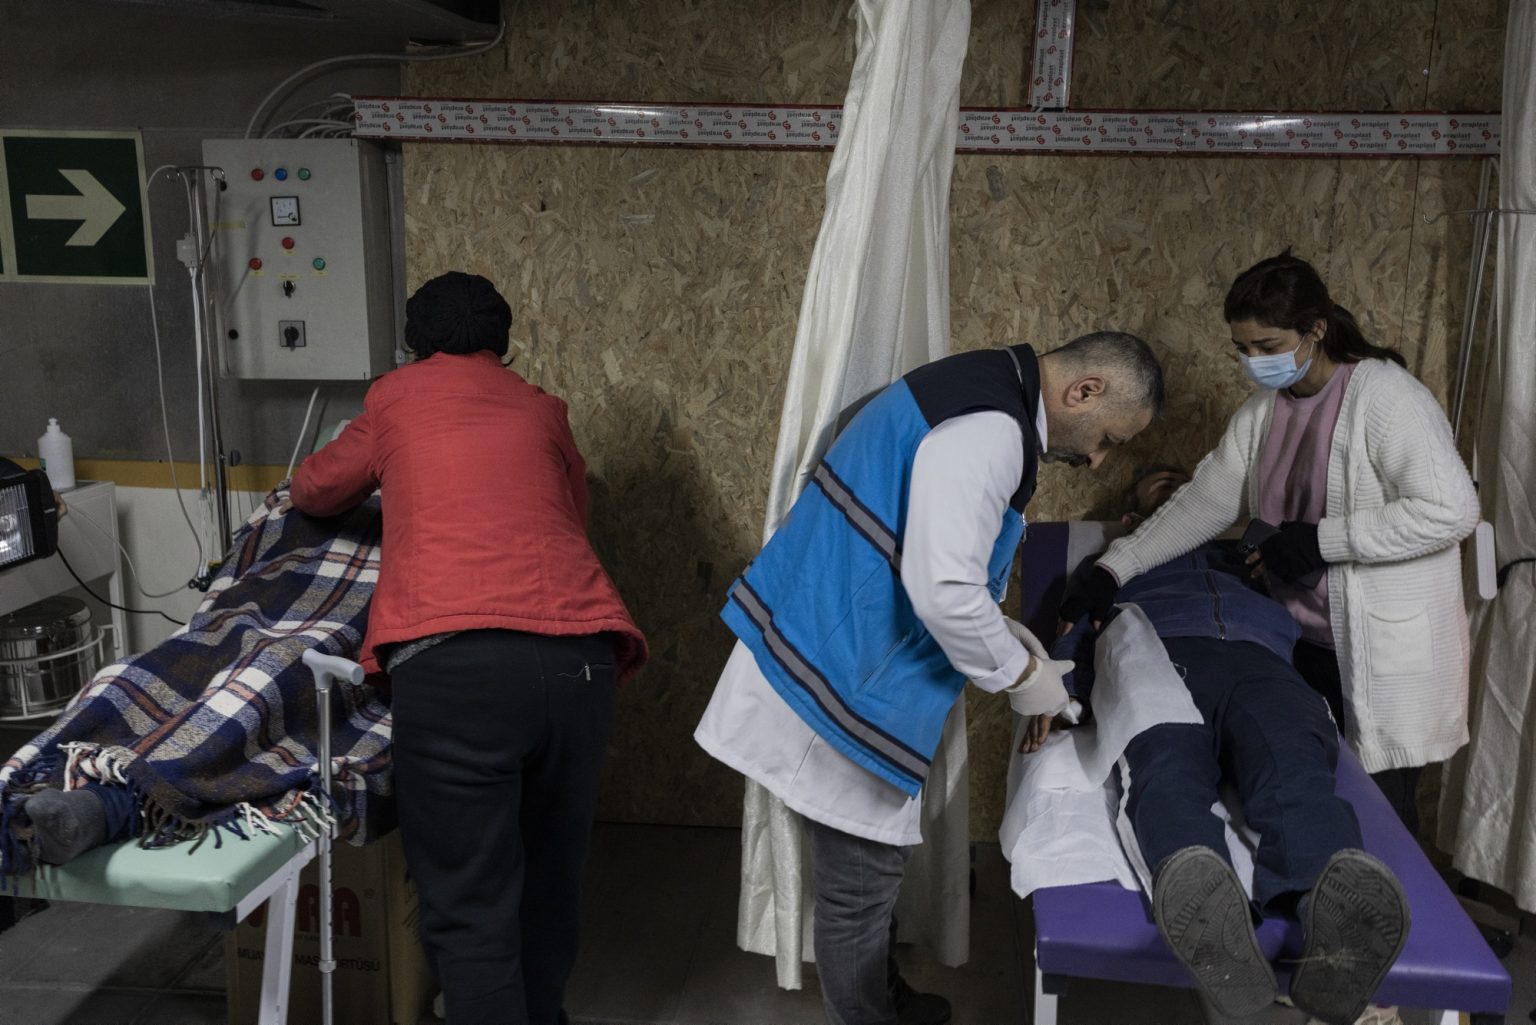 Iskenderun, Turkey, February 2023 - The aftermath of the earthquake that hit southern Turkey and northern Syria. Health workers assist a patient in the clinic set up inside the ferry housing displaced people in Iskenderun. ><
Iskenderun, Turchia, febbraio 2023  Le conseguenze del terremoto che ha colpito la Turchia del Sud e la Siria del nord.